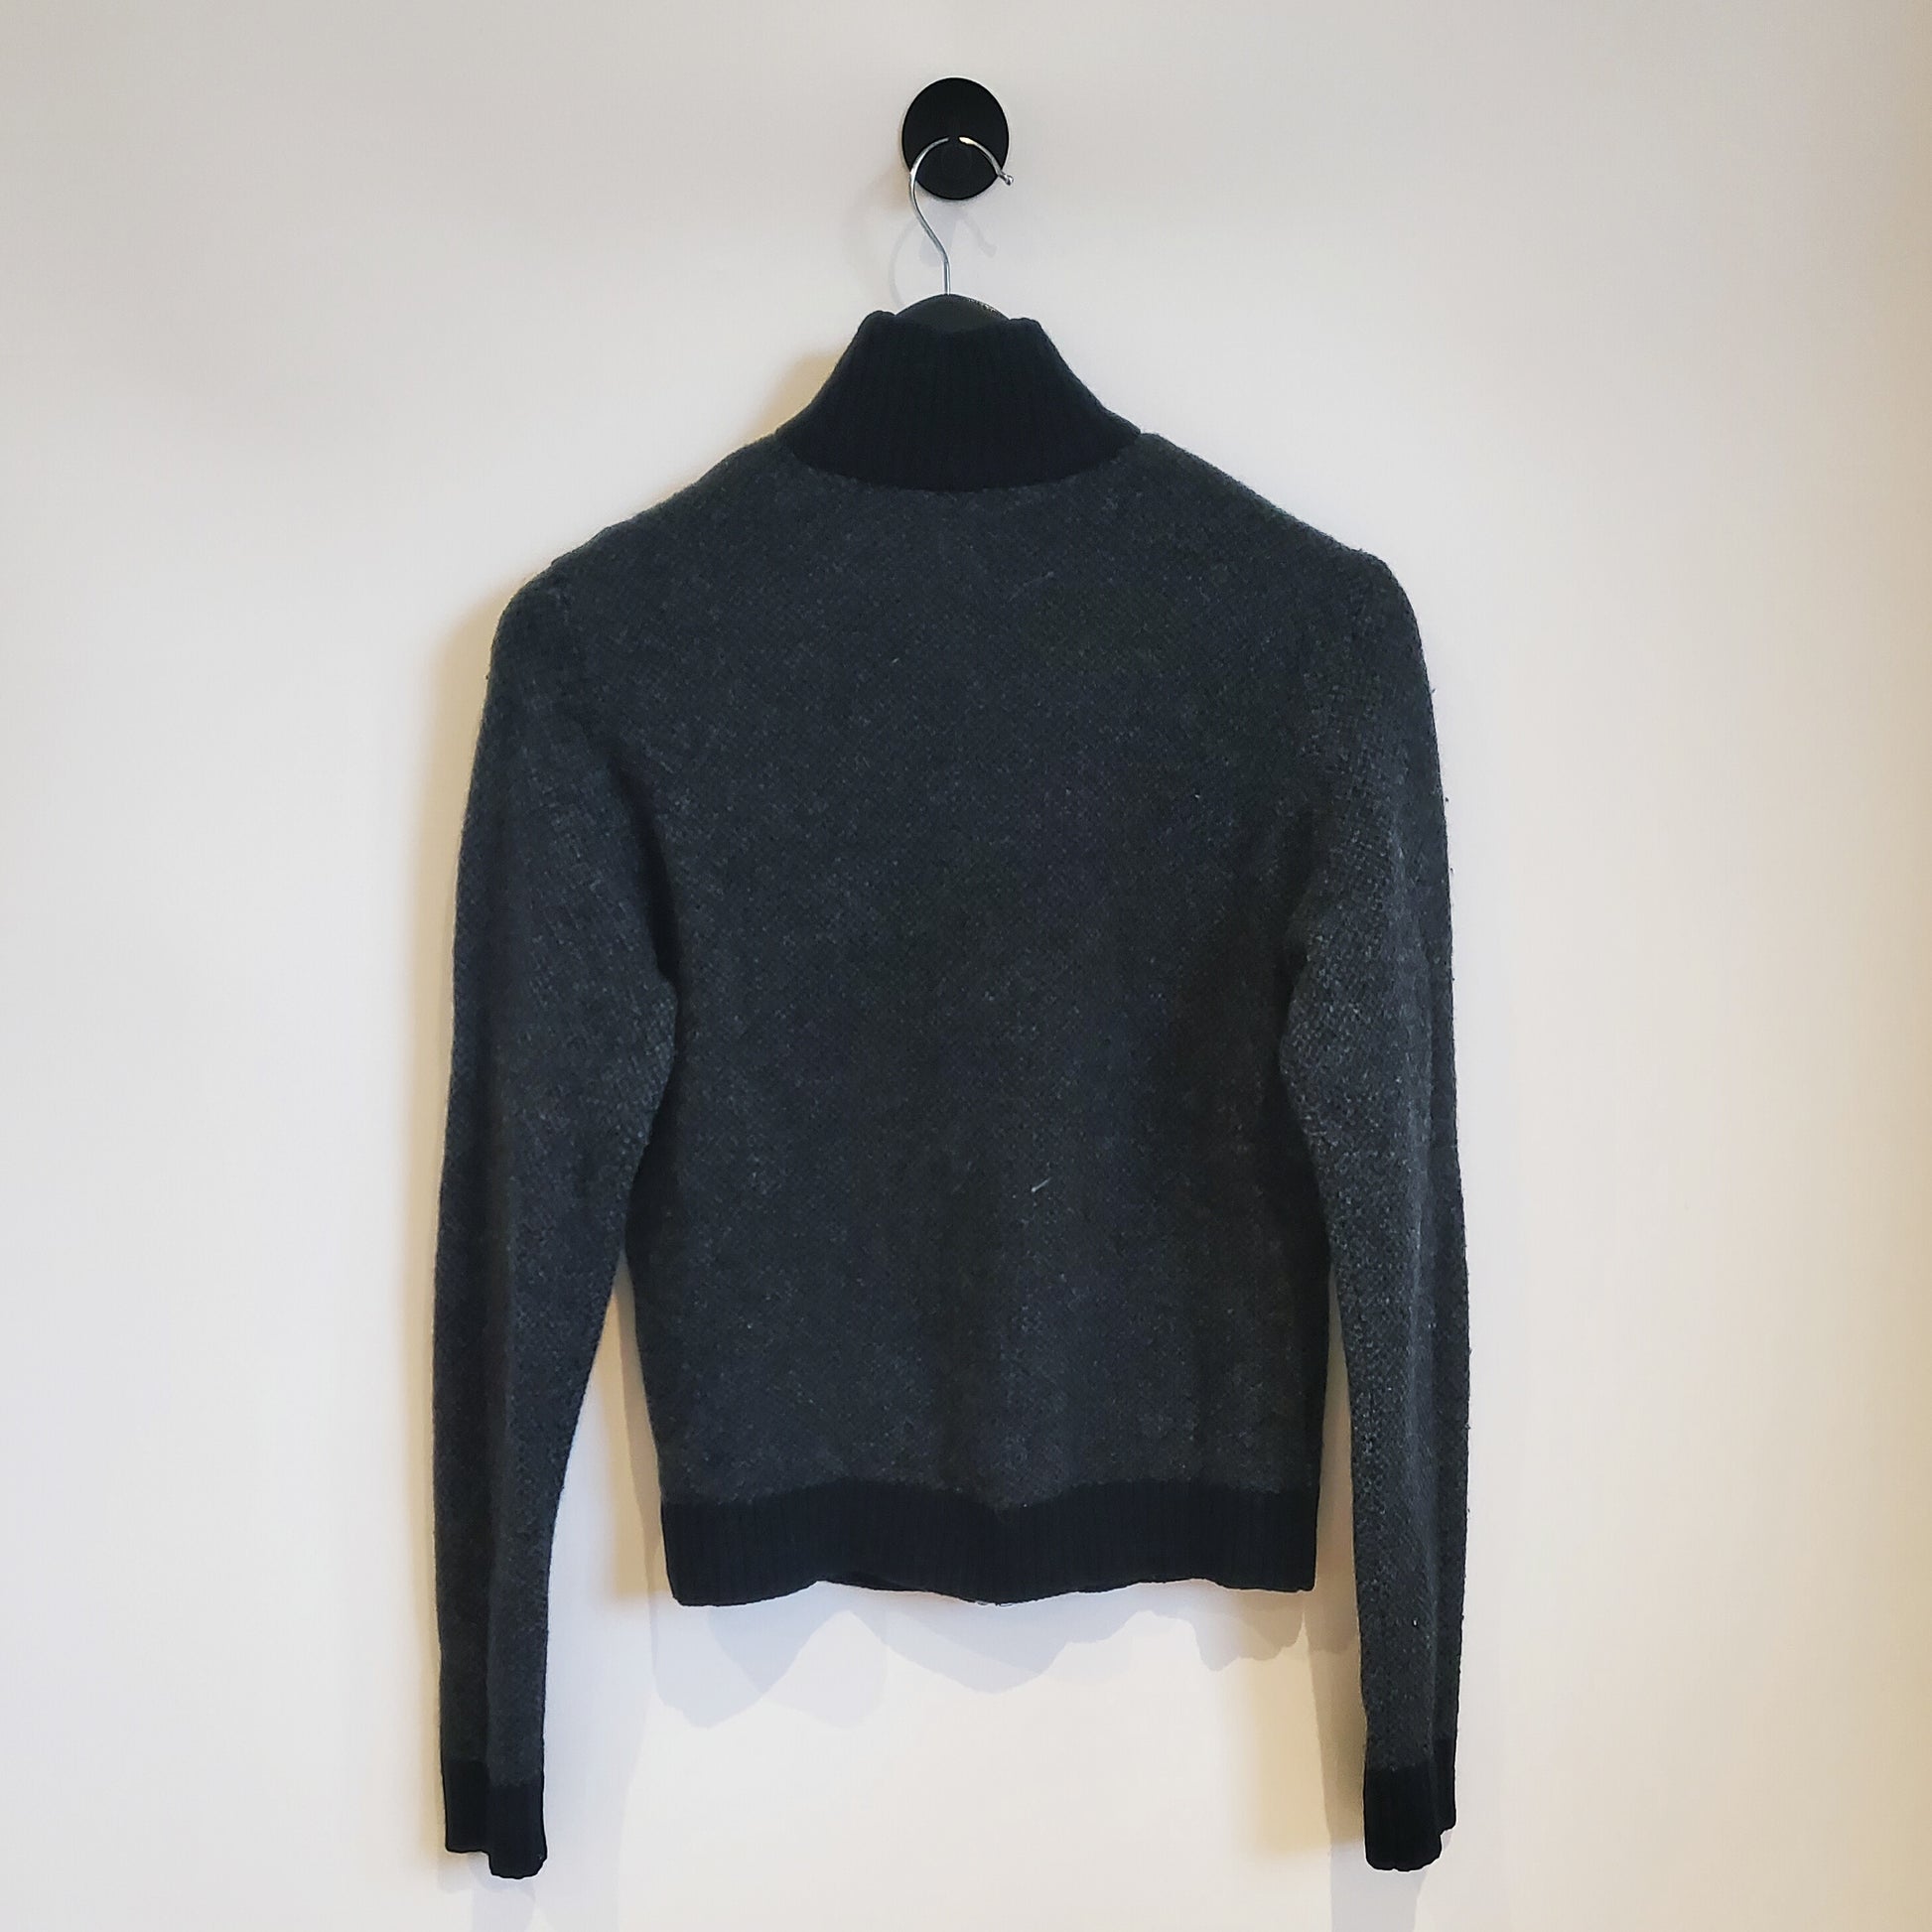 Ralph Lauren Lamb's Wool Knitted Jumper = Grey and Black Size 8-10